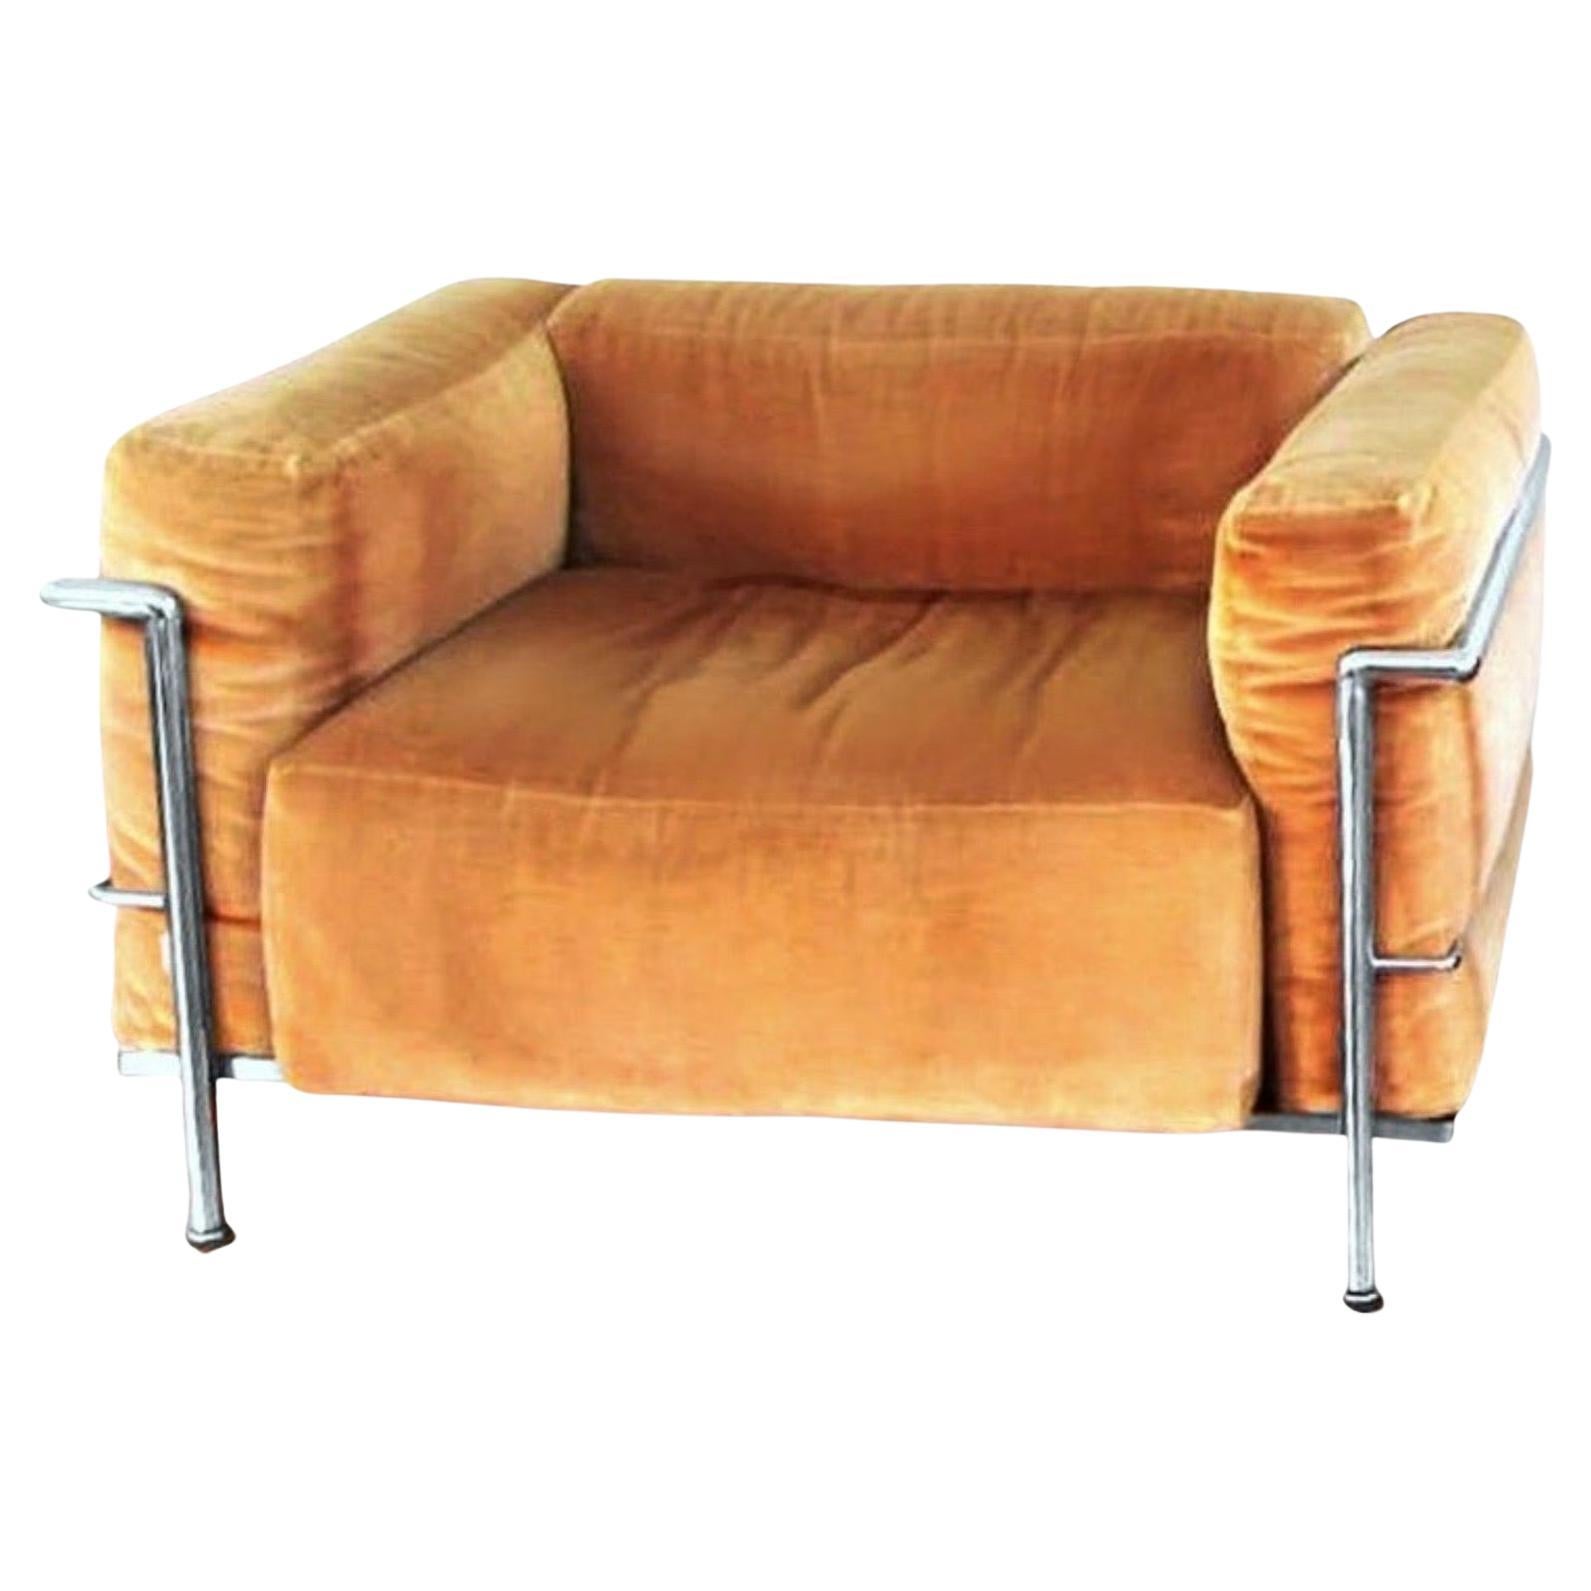 Le Corbusier LC3 Fauteuil Grand Confort Amber Mohair Armchair, Cassina, Italy